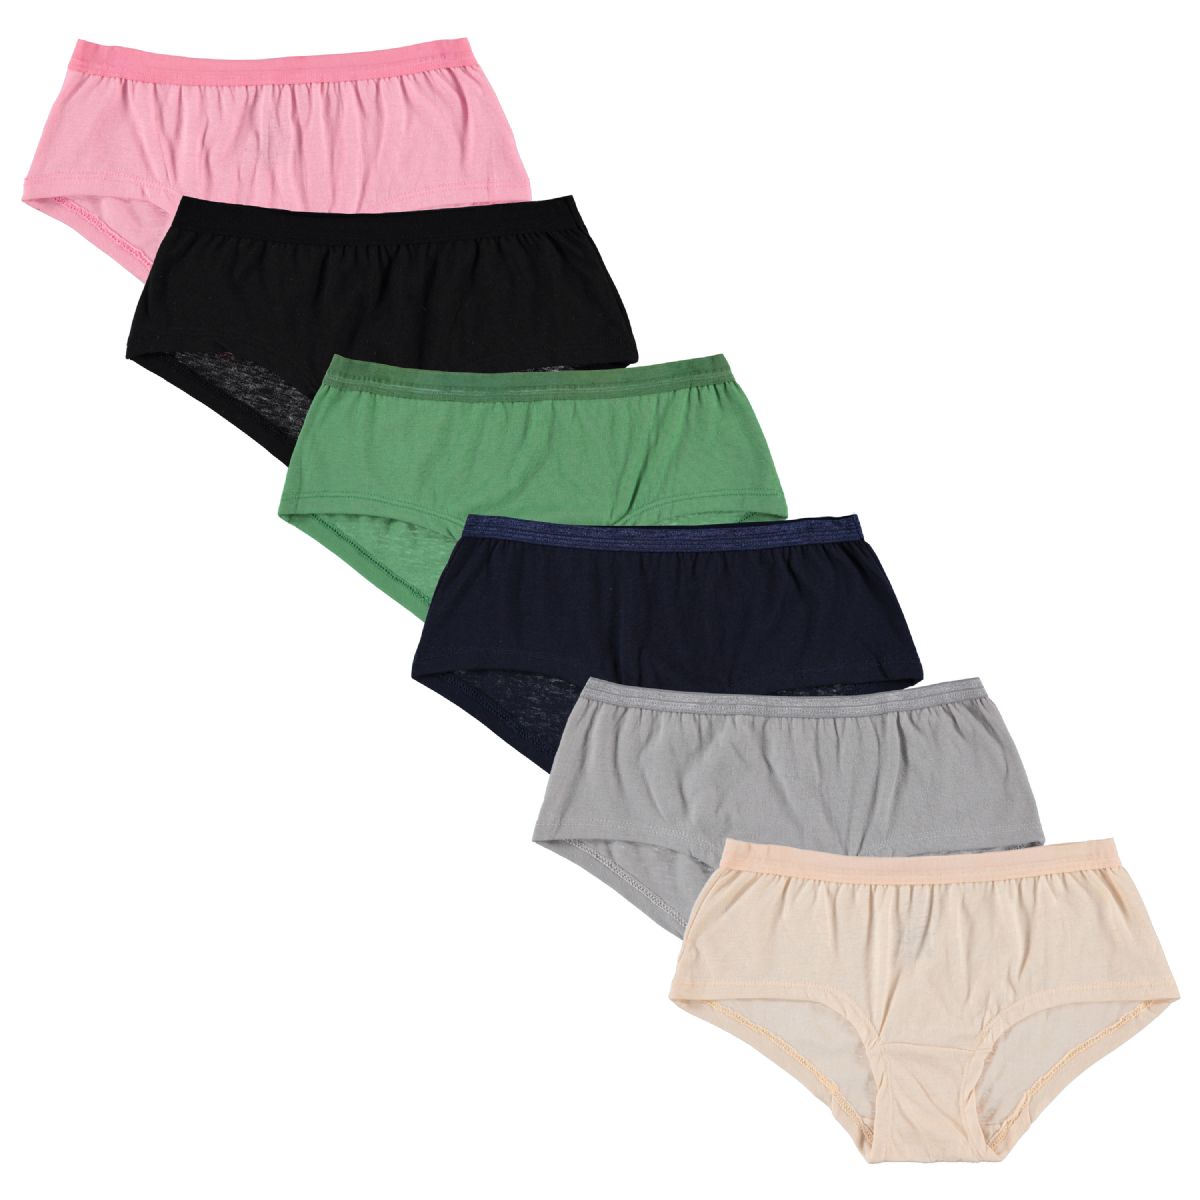 6 Wholesale Yacht & Smith Womens Cotton Blend Underwear In Assorted Colors, Size Small